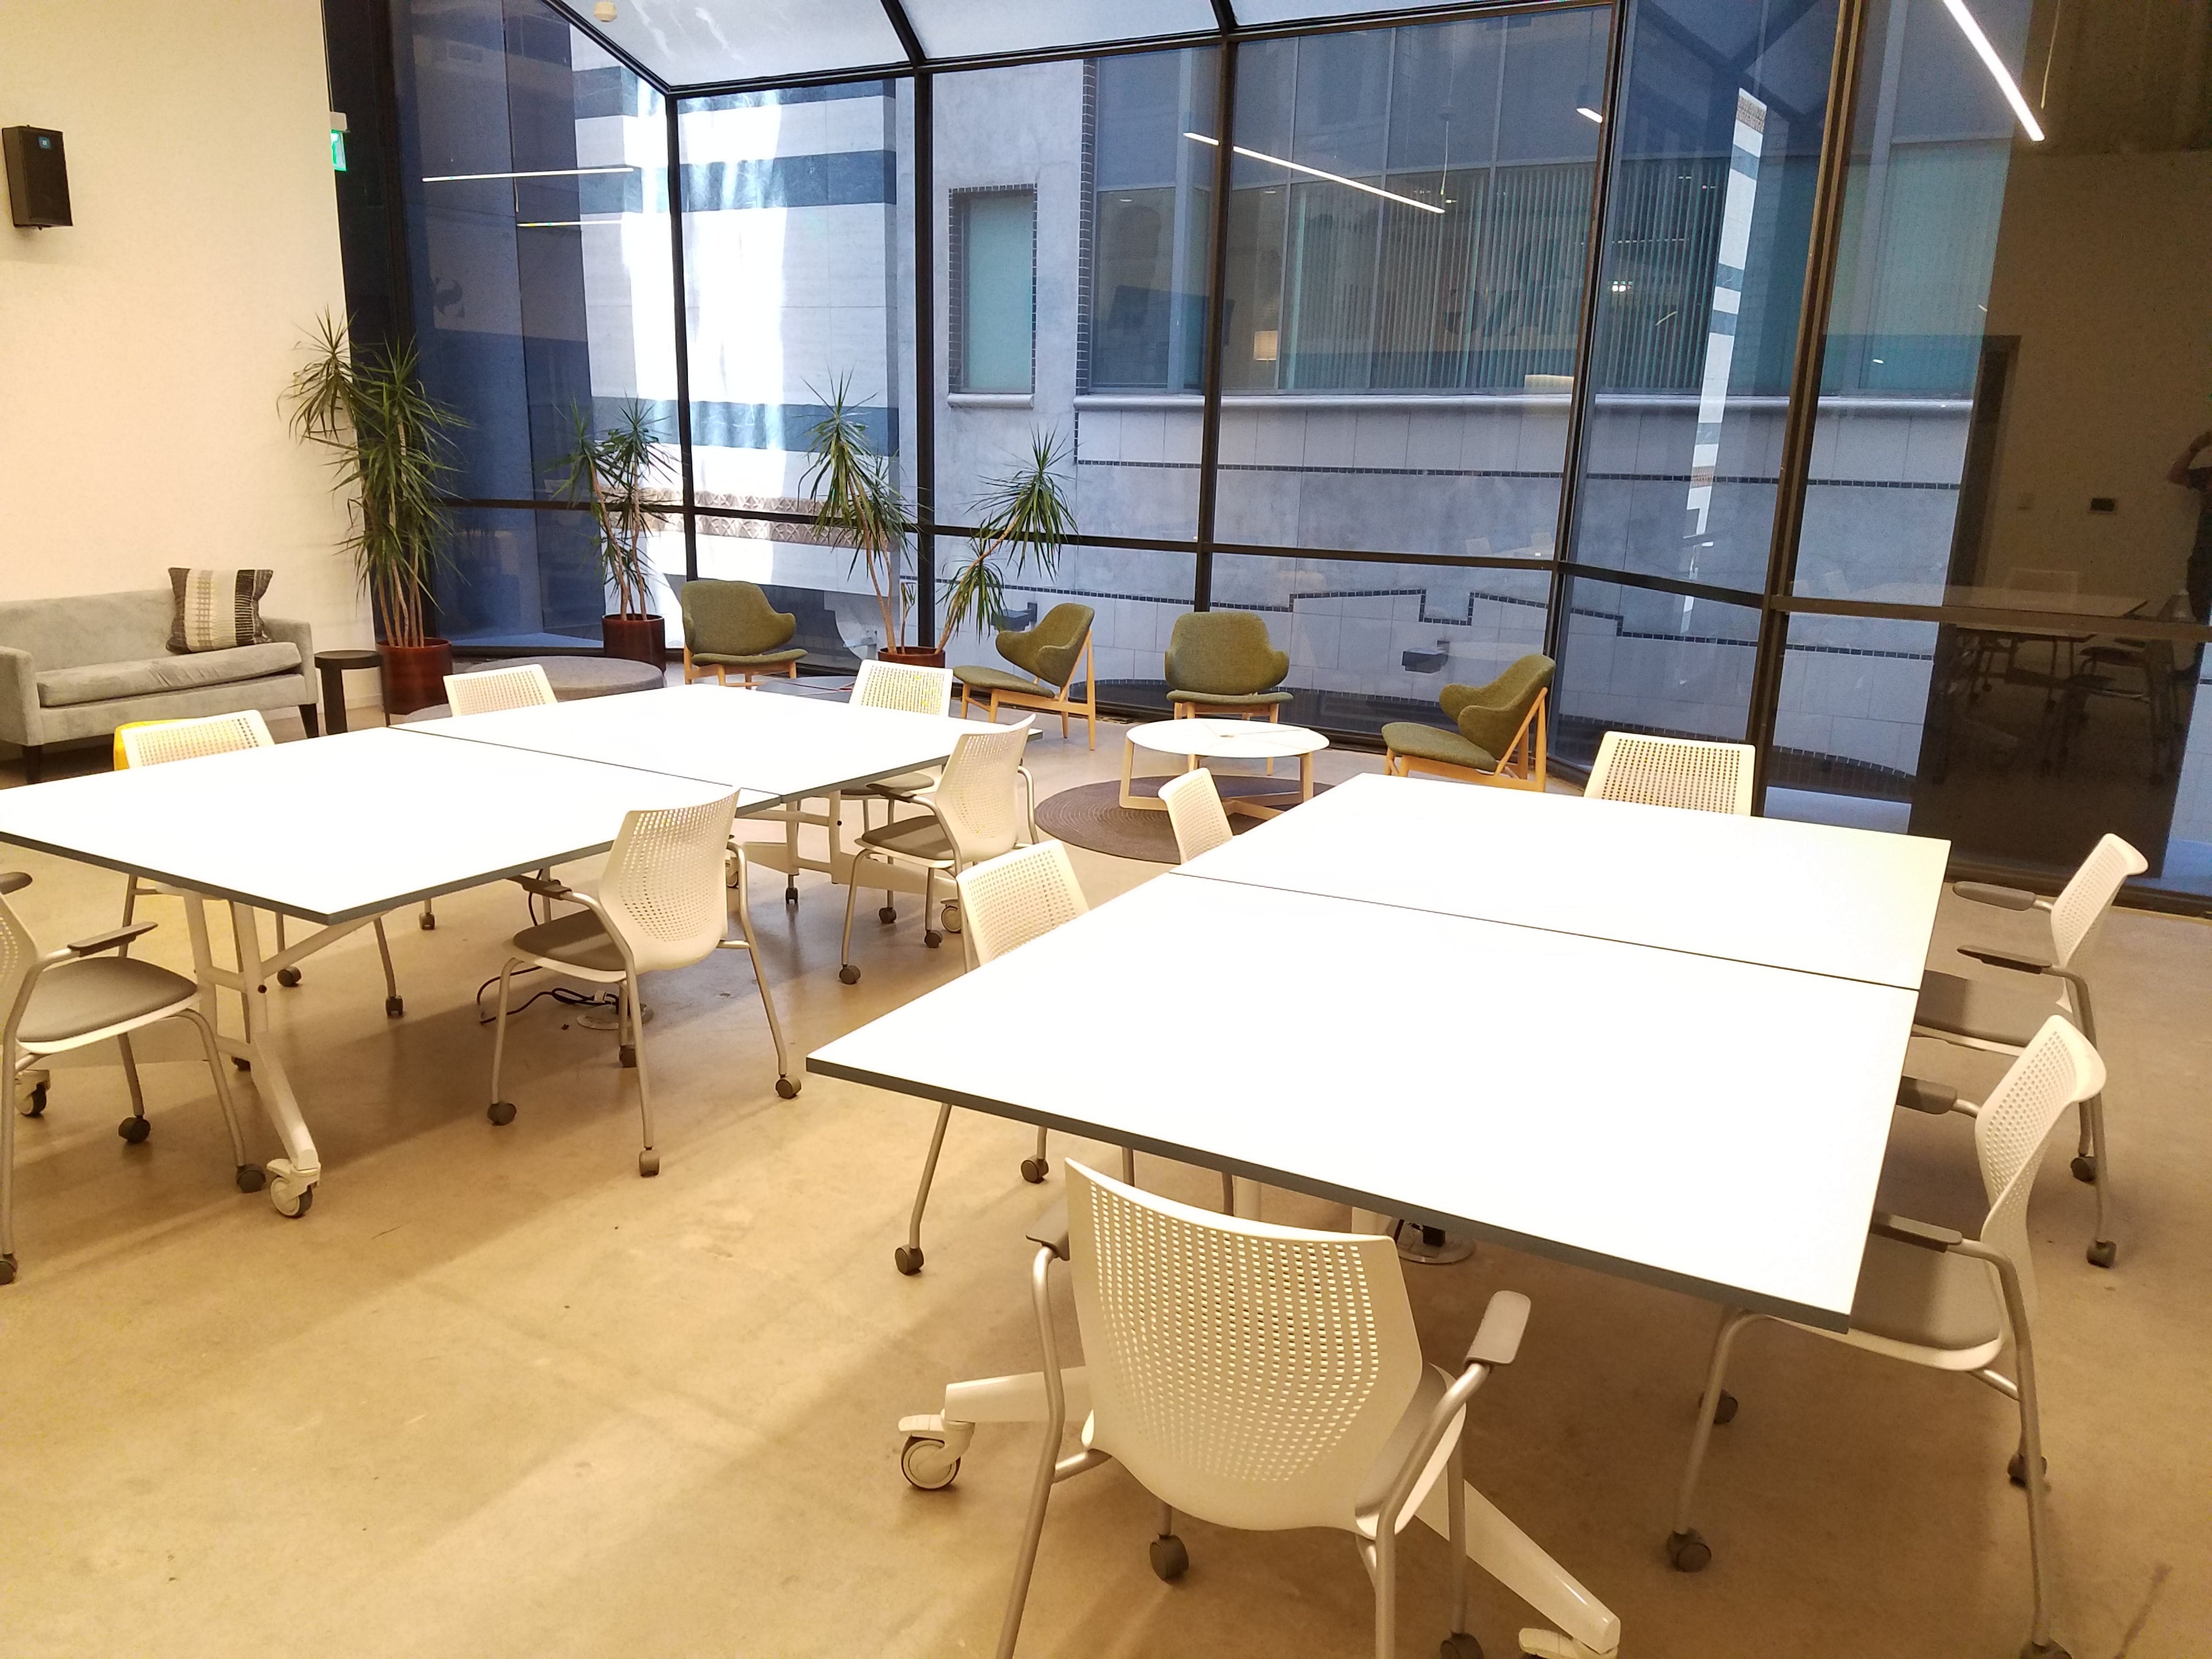 Nomad Sport - 3 in 1 -  Conference, Ping Pong and Whiteboard Folding Table by Scale 1:1